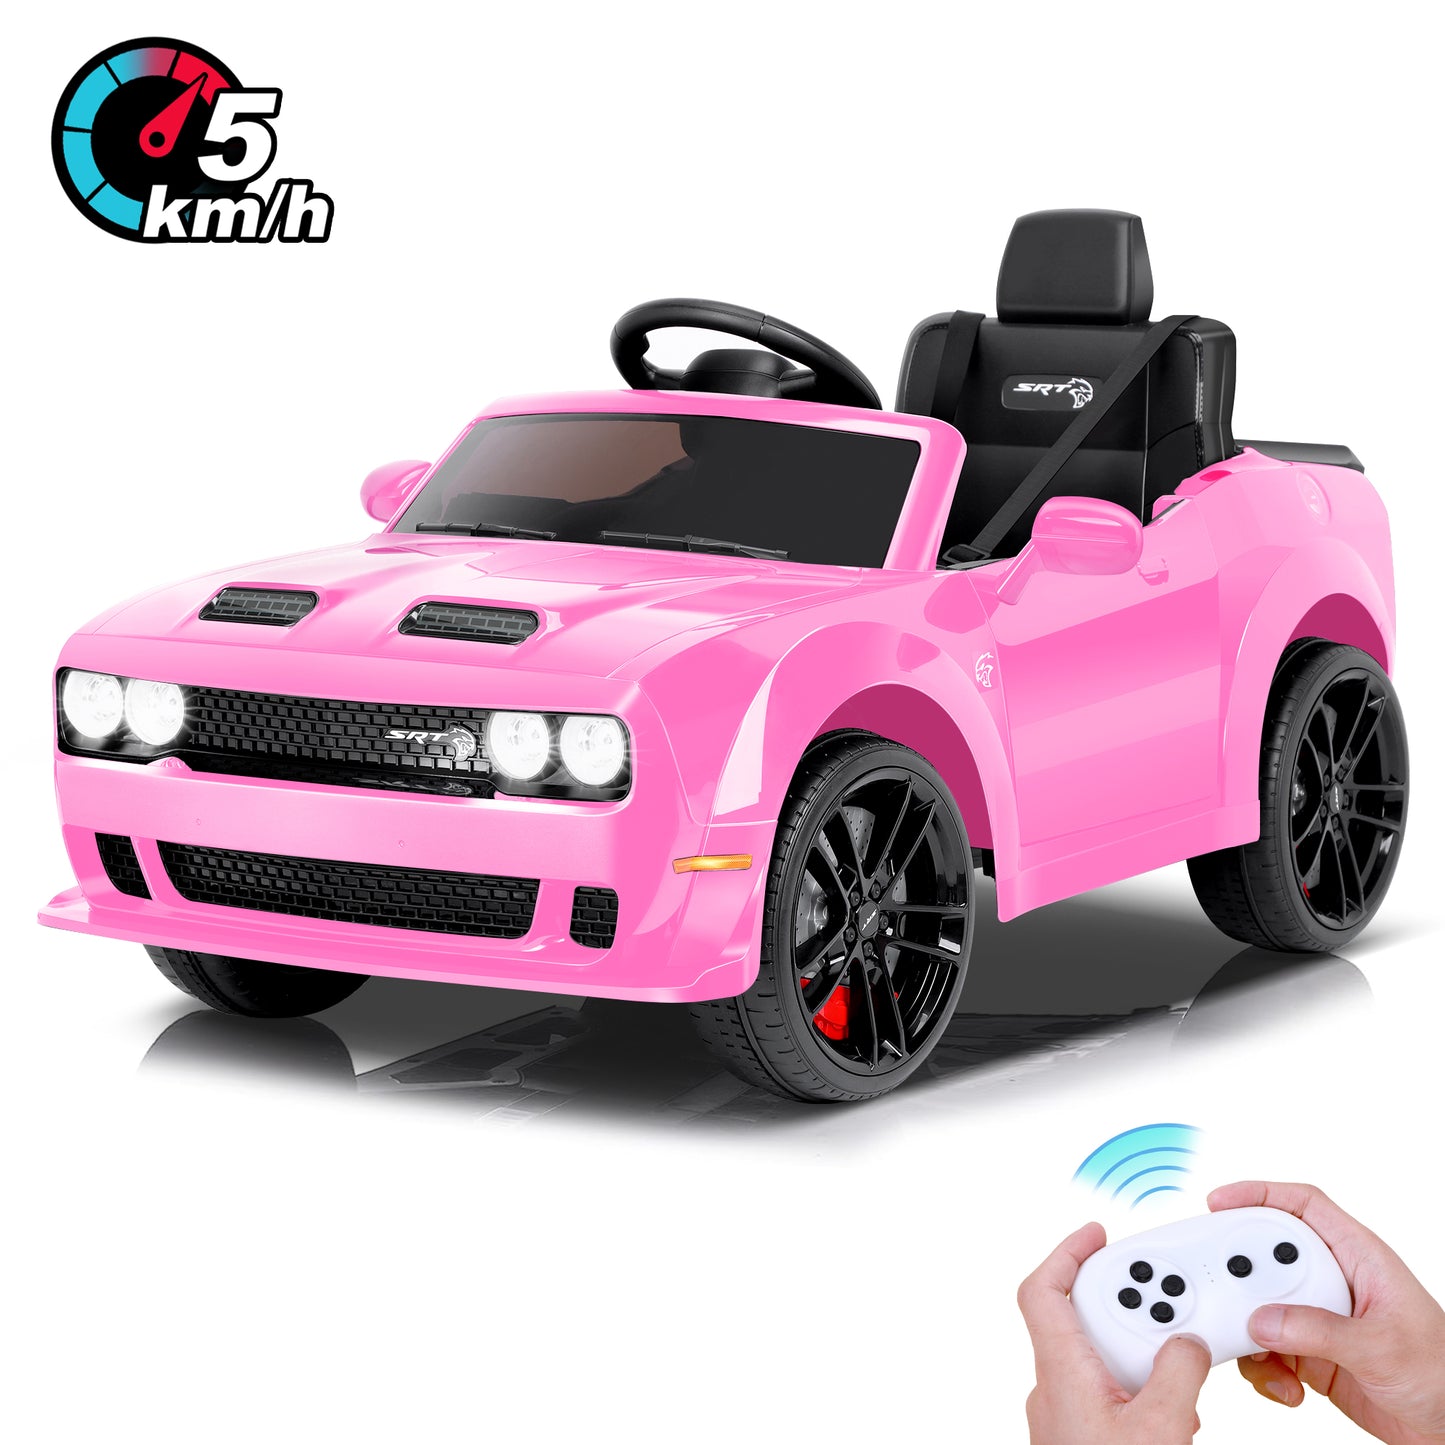 Dodge Challenger SRT Kids Ride on Car,Wisairt 12 V Battery Powered Electric Vehicle w/ Remote Control,Bluetooth,LED Lights